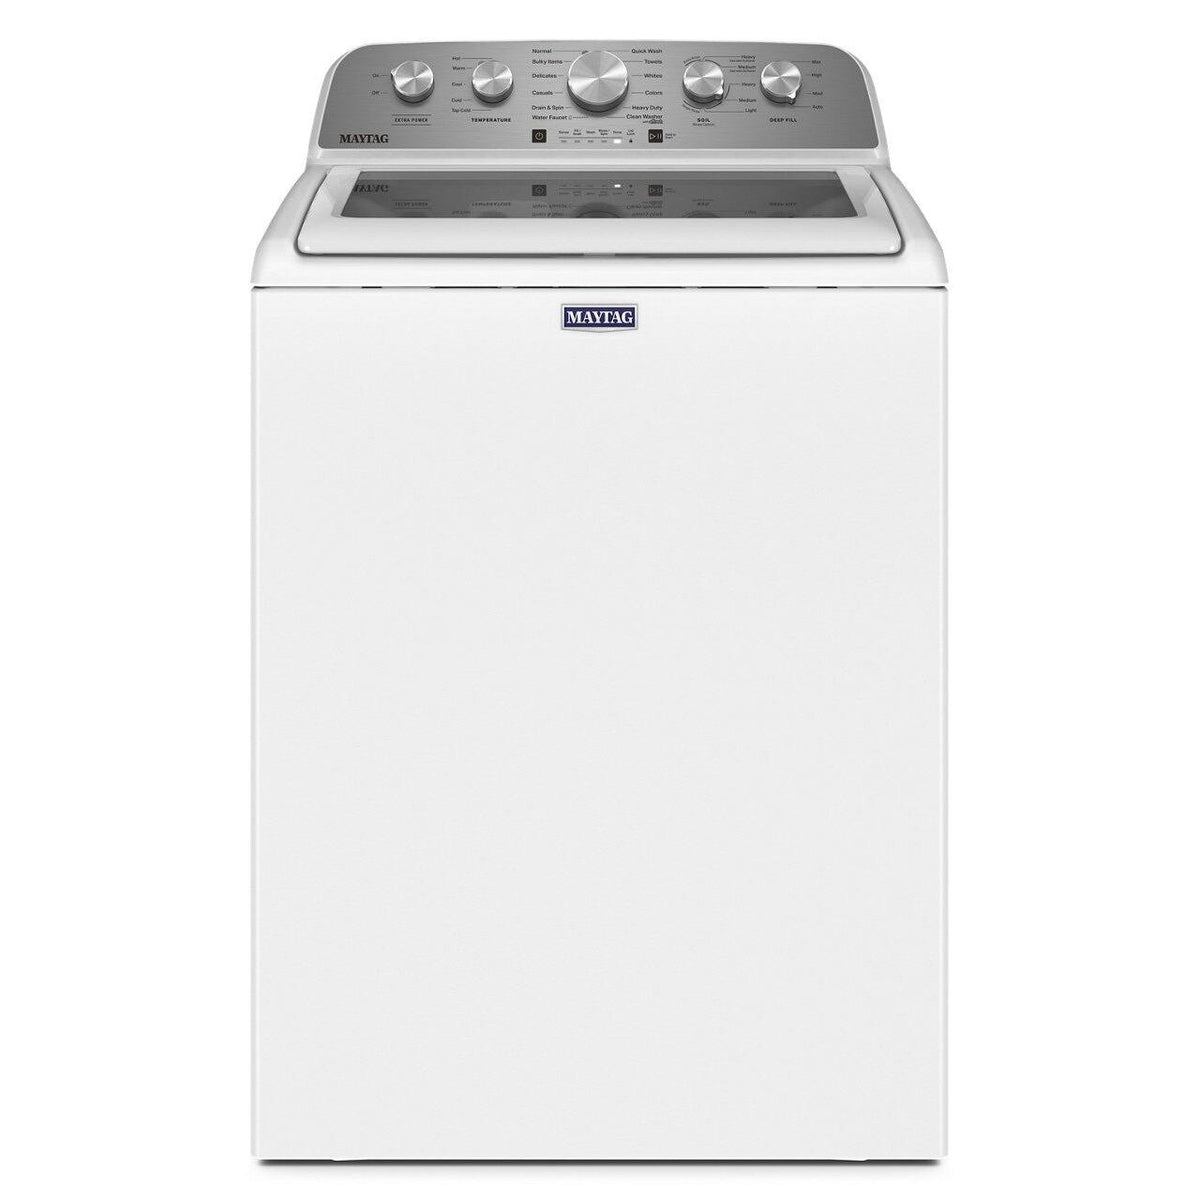 5.4 cu. ft. Top Loading Washer MVW5435PW IMAGE 1